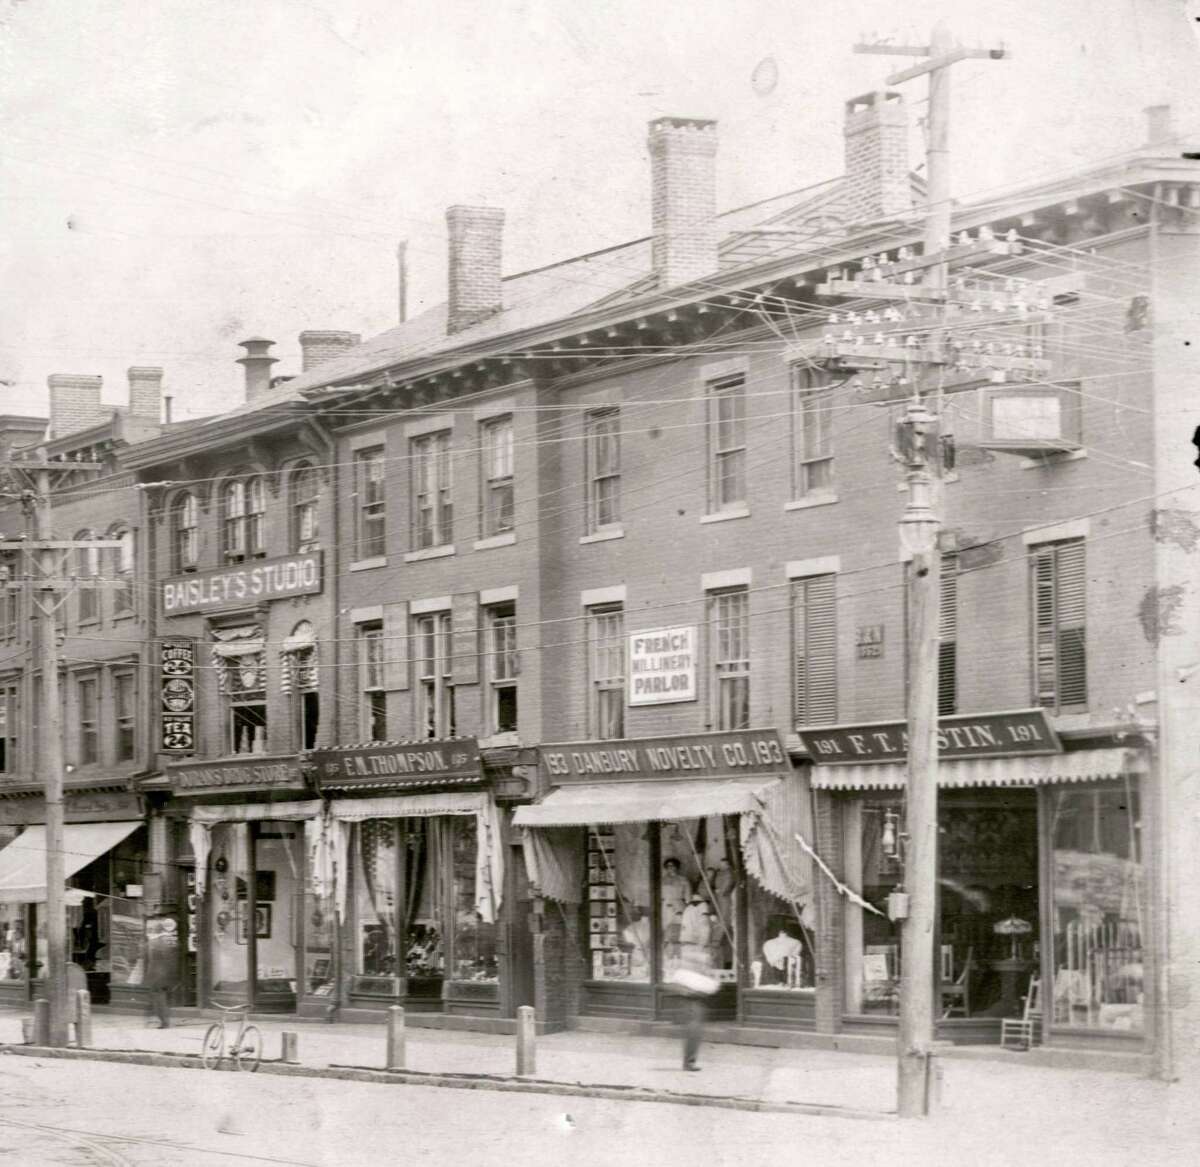 This stretch of Main Street in Danbury was referred to as The Thompson Block. On the second floor of 197 Main, notice Baisley Studios. Frank Henry Baisley was a hatter in his younger life before getting into the photography trade. He had a studio in New Rochelle, NY before he came to Danbury to conduct business.